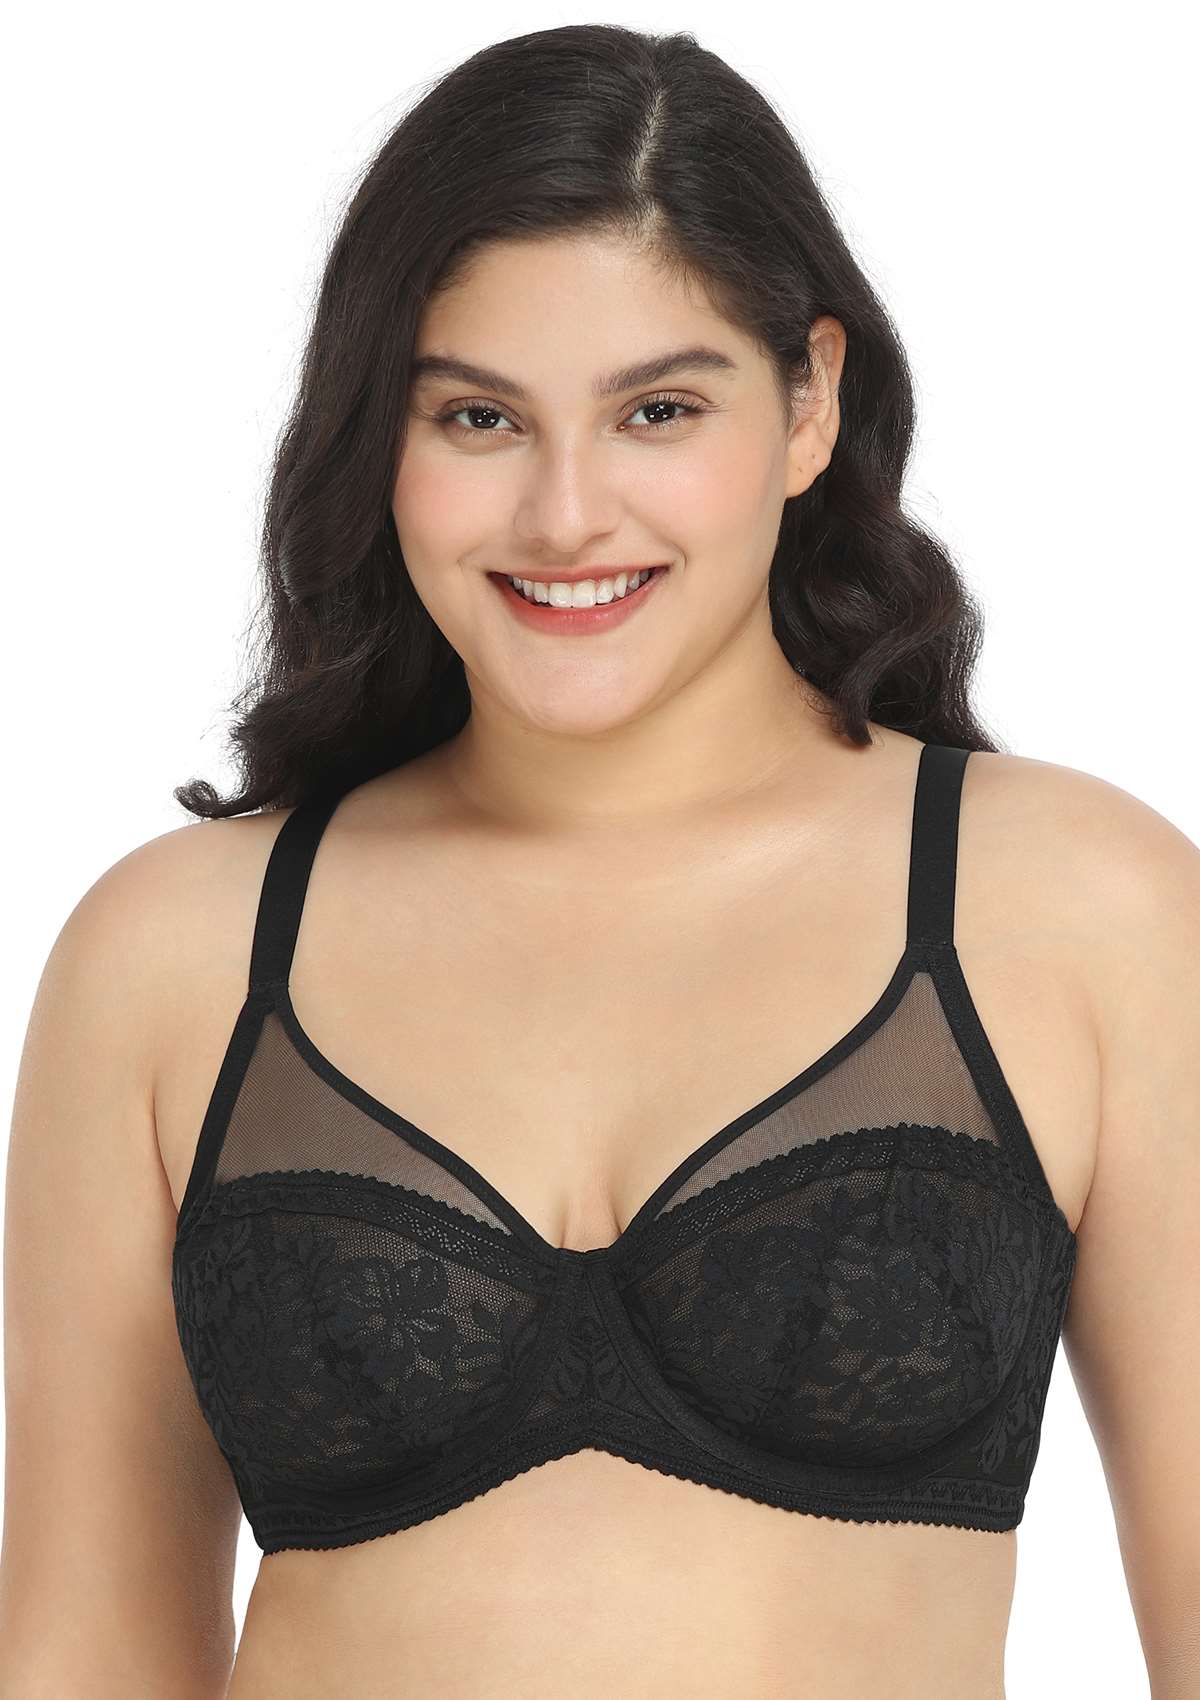 HSIA Gladioli Lace Mesh Minimizing Unlined Underwire Bra For Fuller Busts - Black / 44 / D